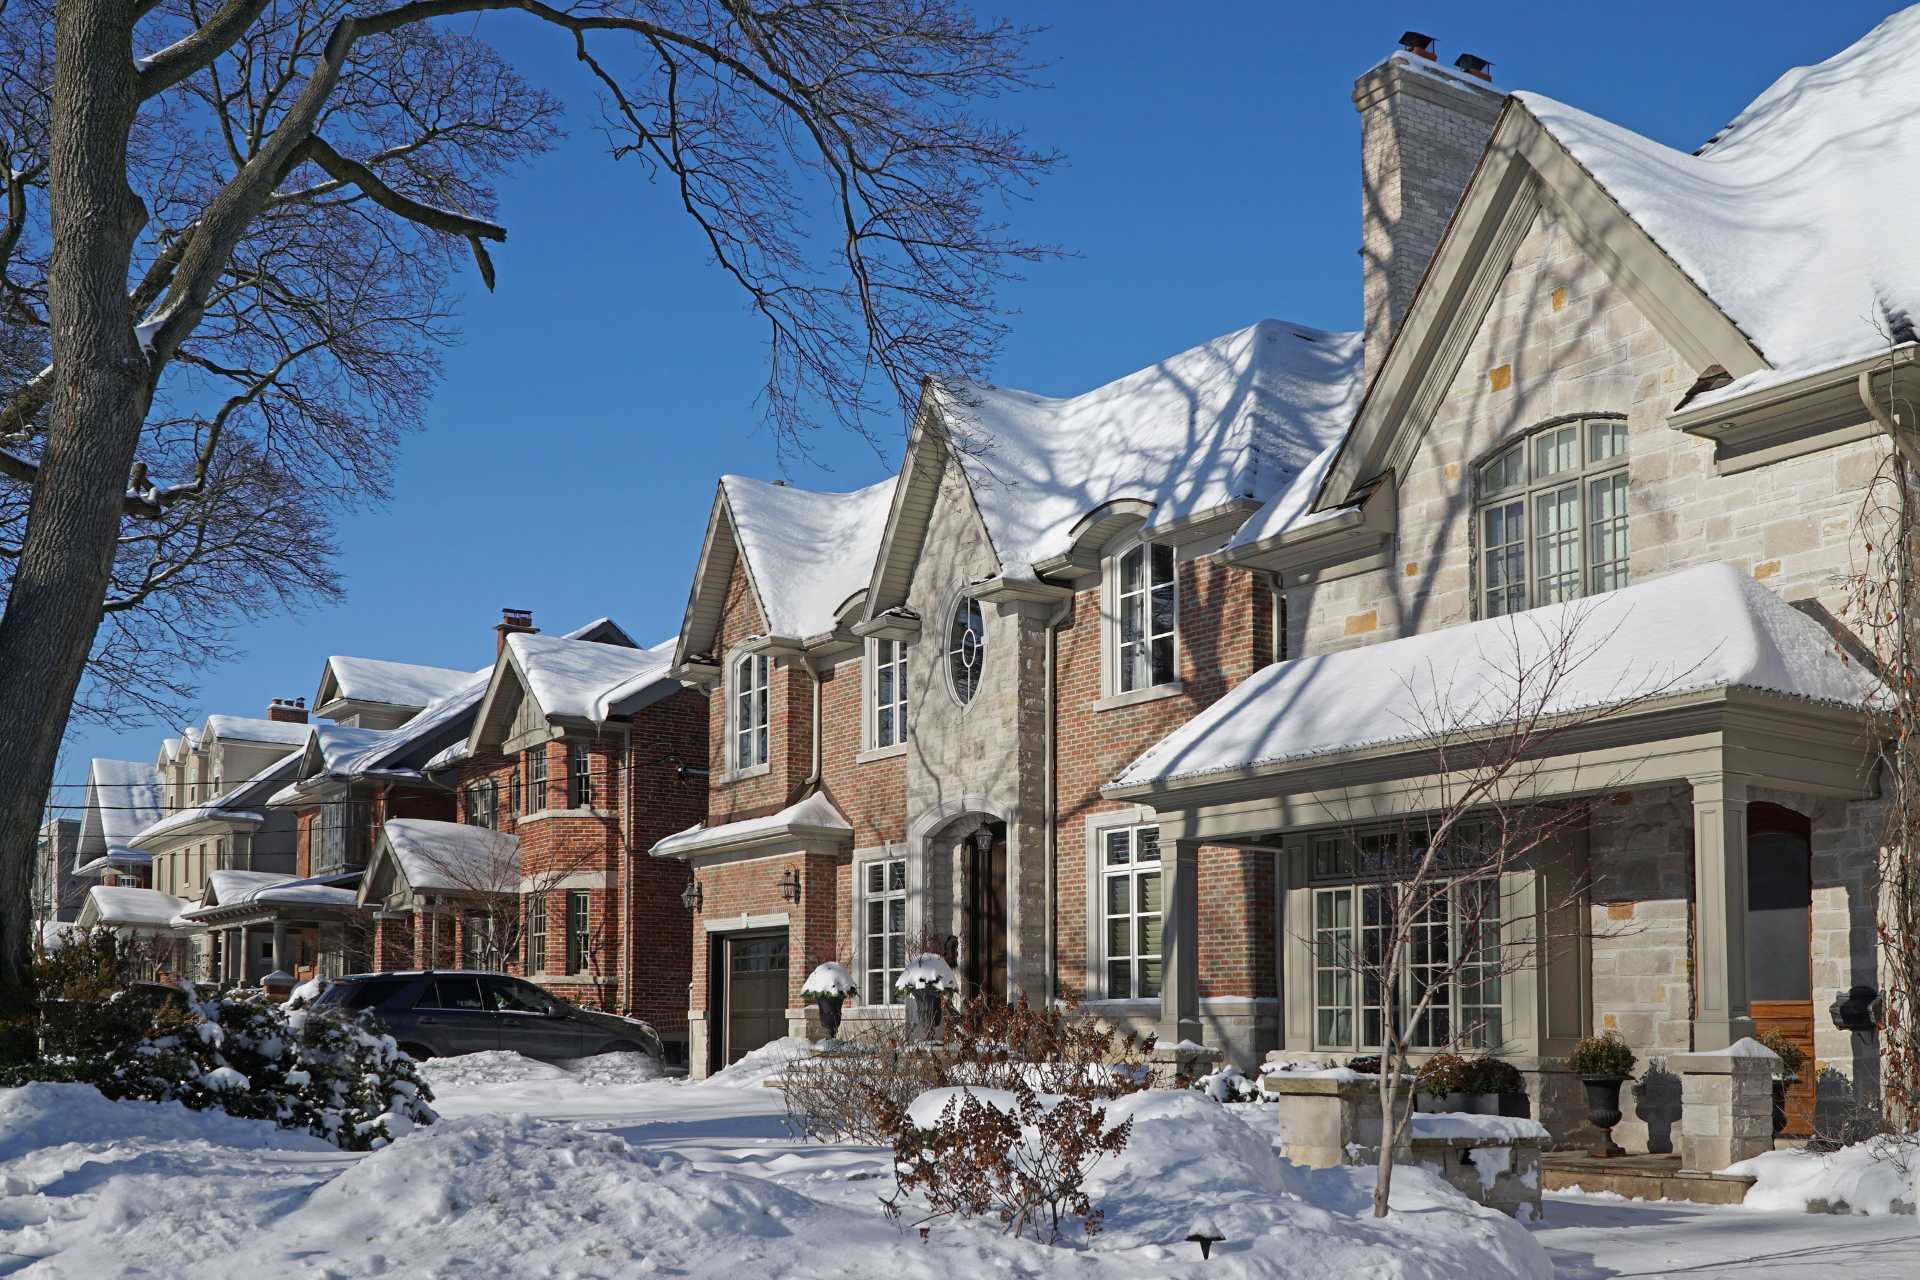 5 Tips For Protecting Your Home From Freezing Temperatures (and Keep Your Family Cozy)